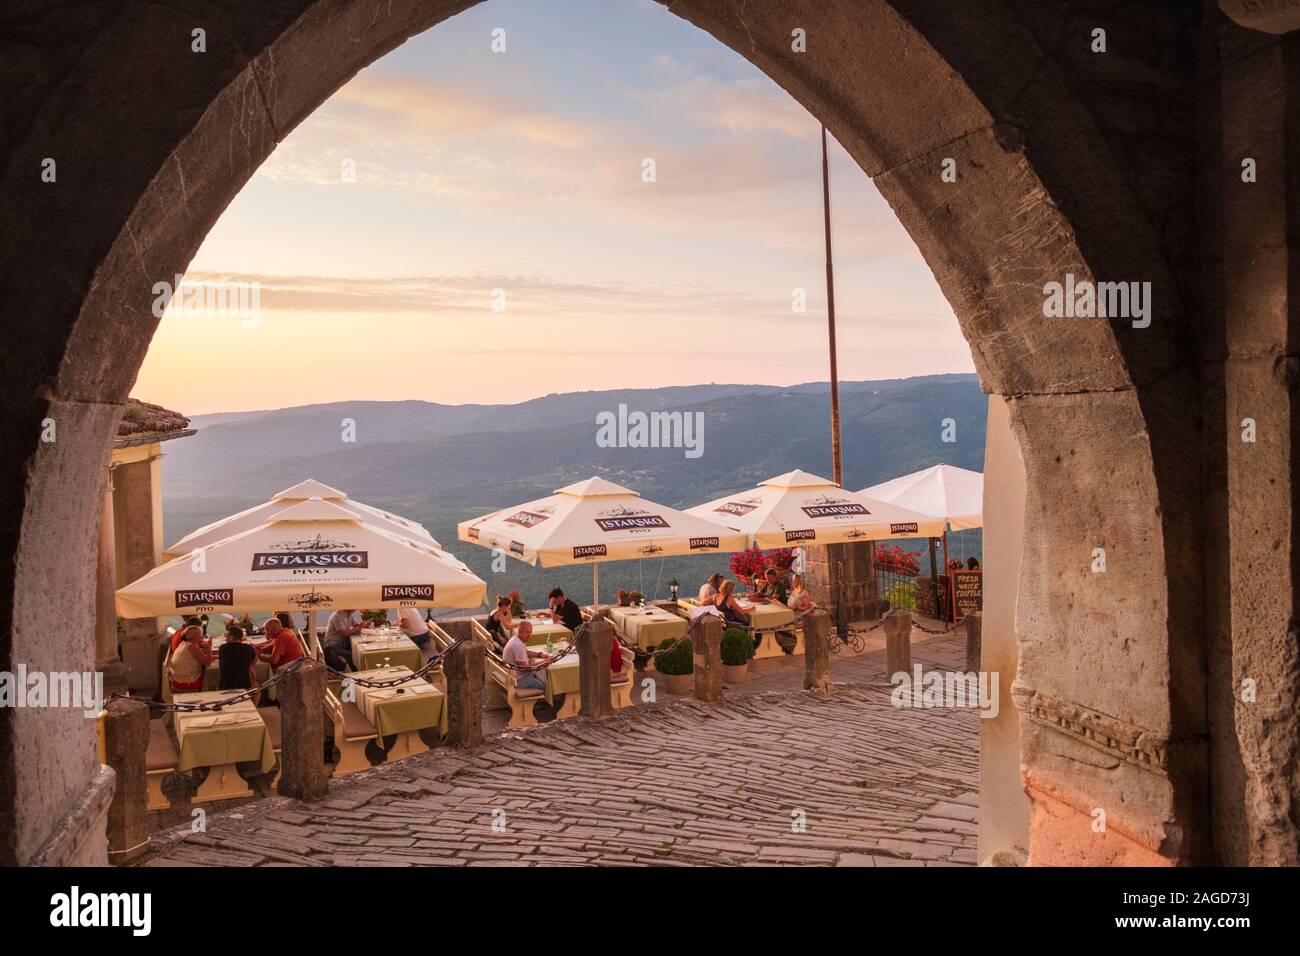 Outdoor Dining at Resaurant with view of mountains at sunset, Motovun, Istria, Croatia Stock Photo